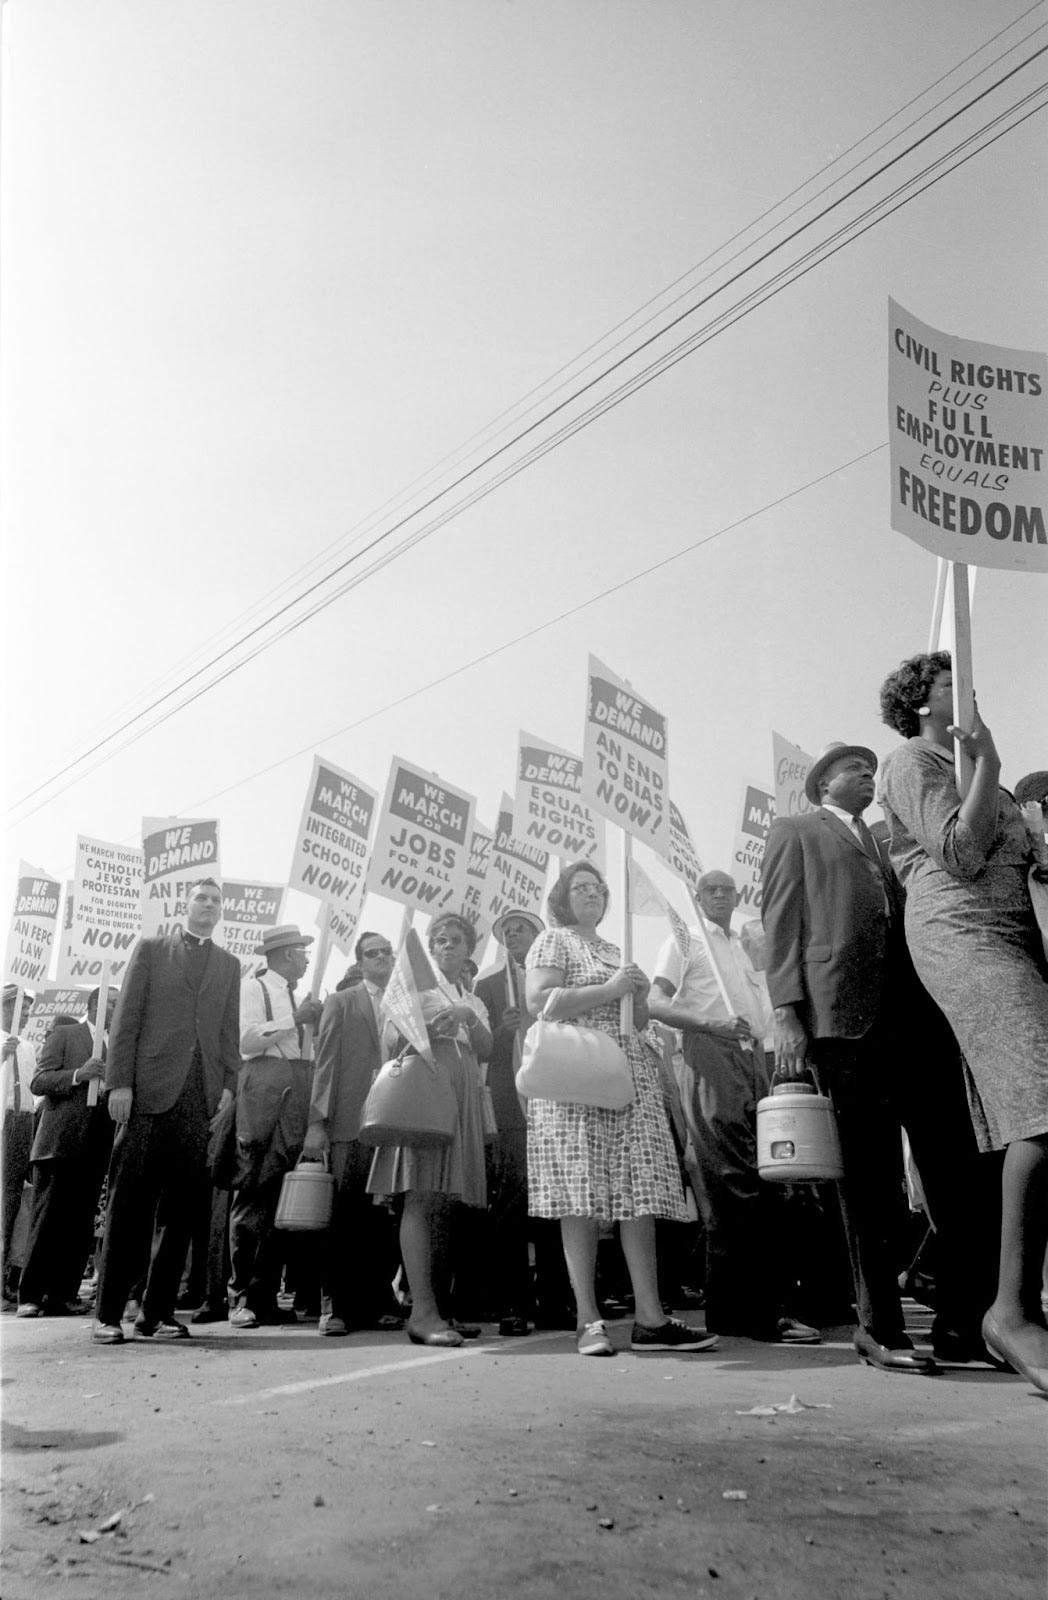 a line of people marching with picket signs saying "civil rights plus full employment equals freedom"